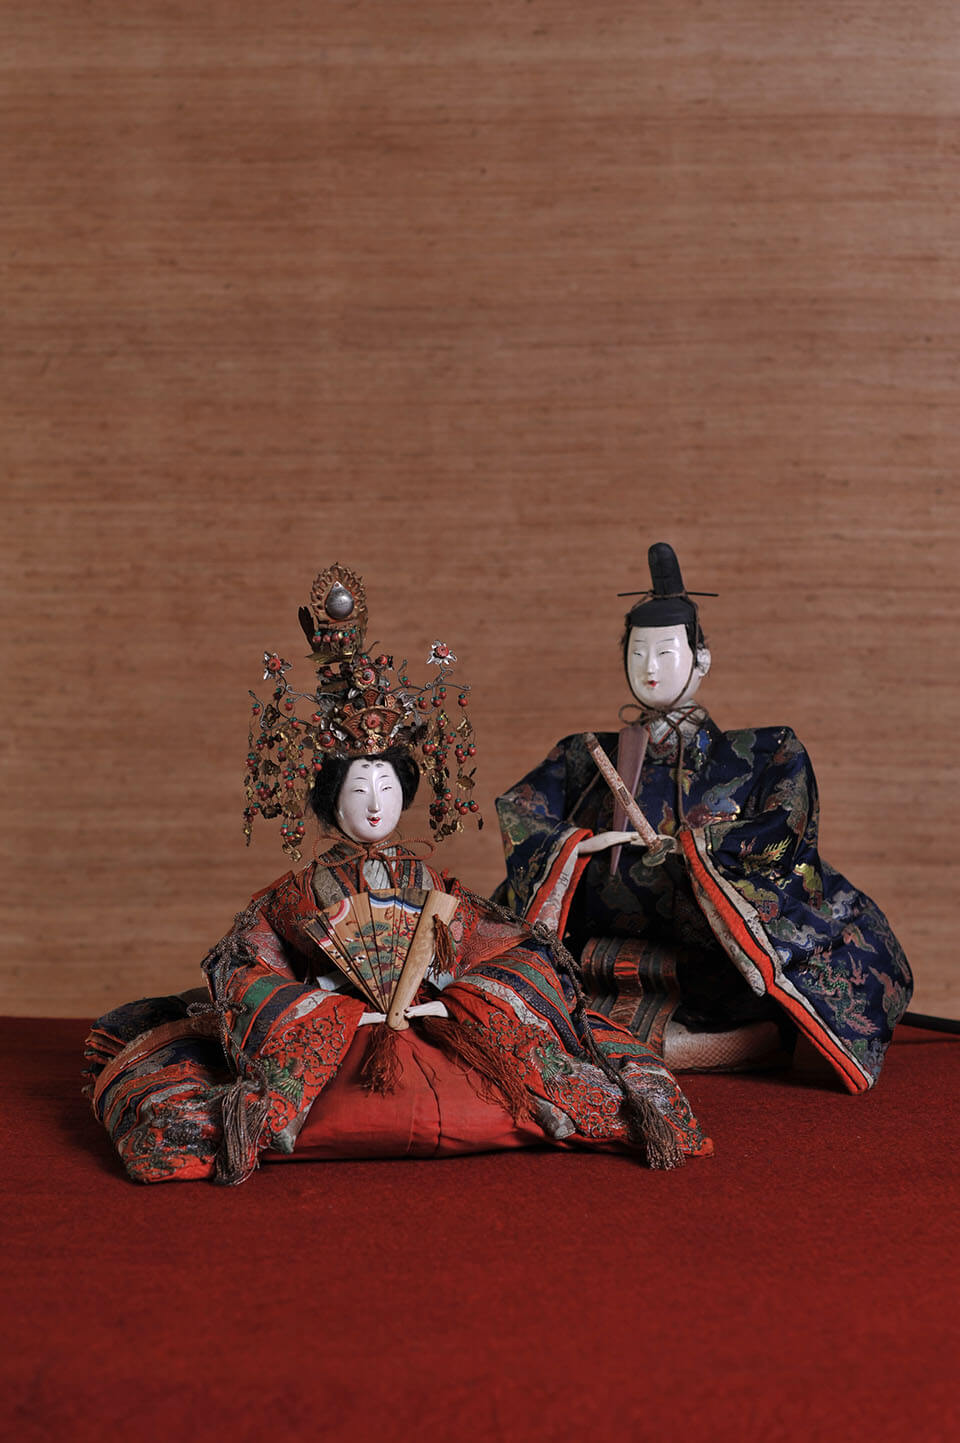 70 cm tall Takasago dolls and Edo and Meiji dolls in the 100-year-old former Shirahata residence